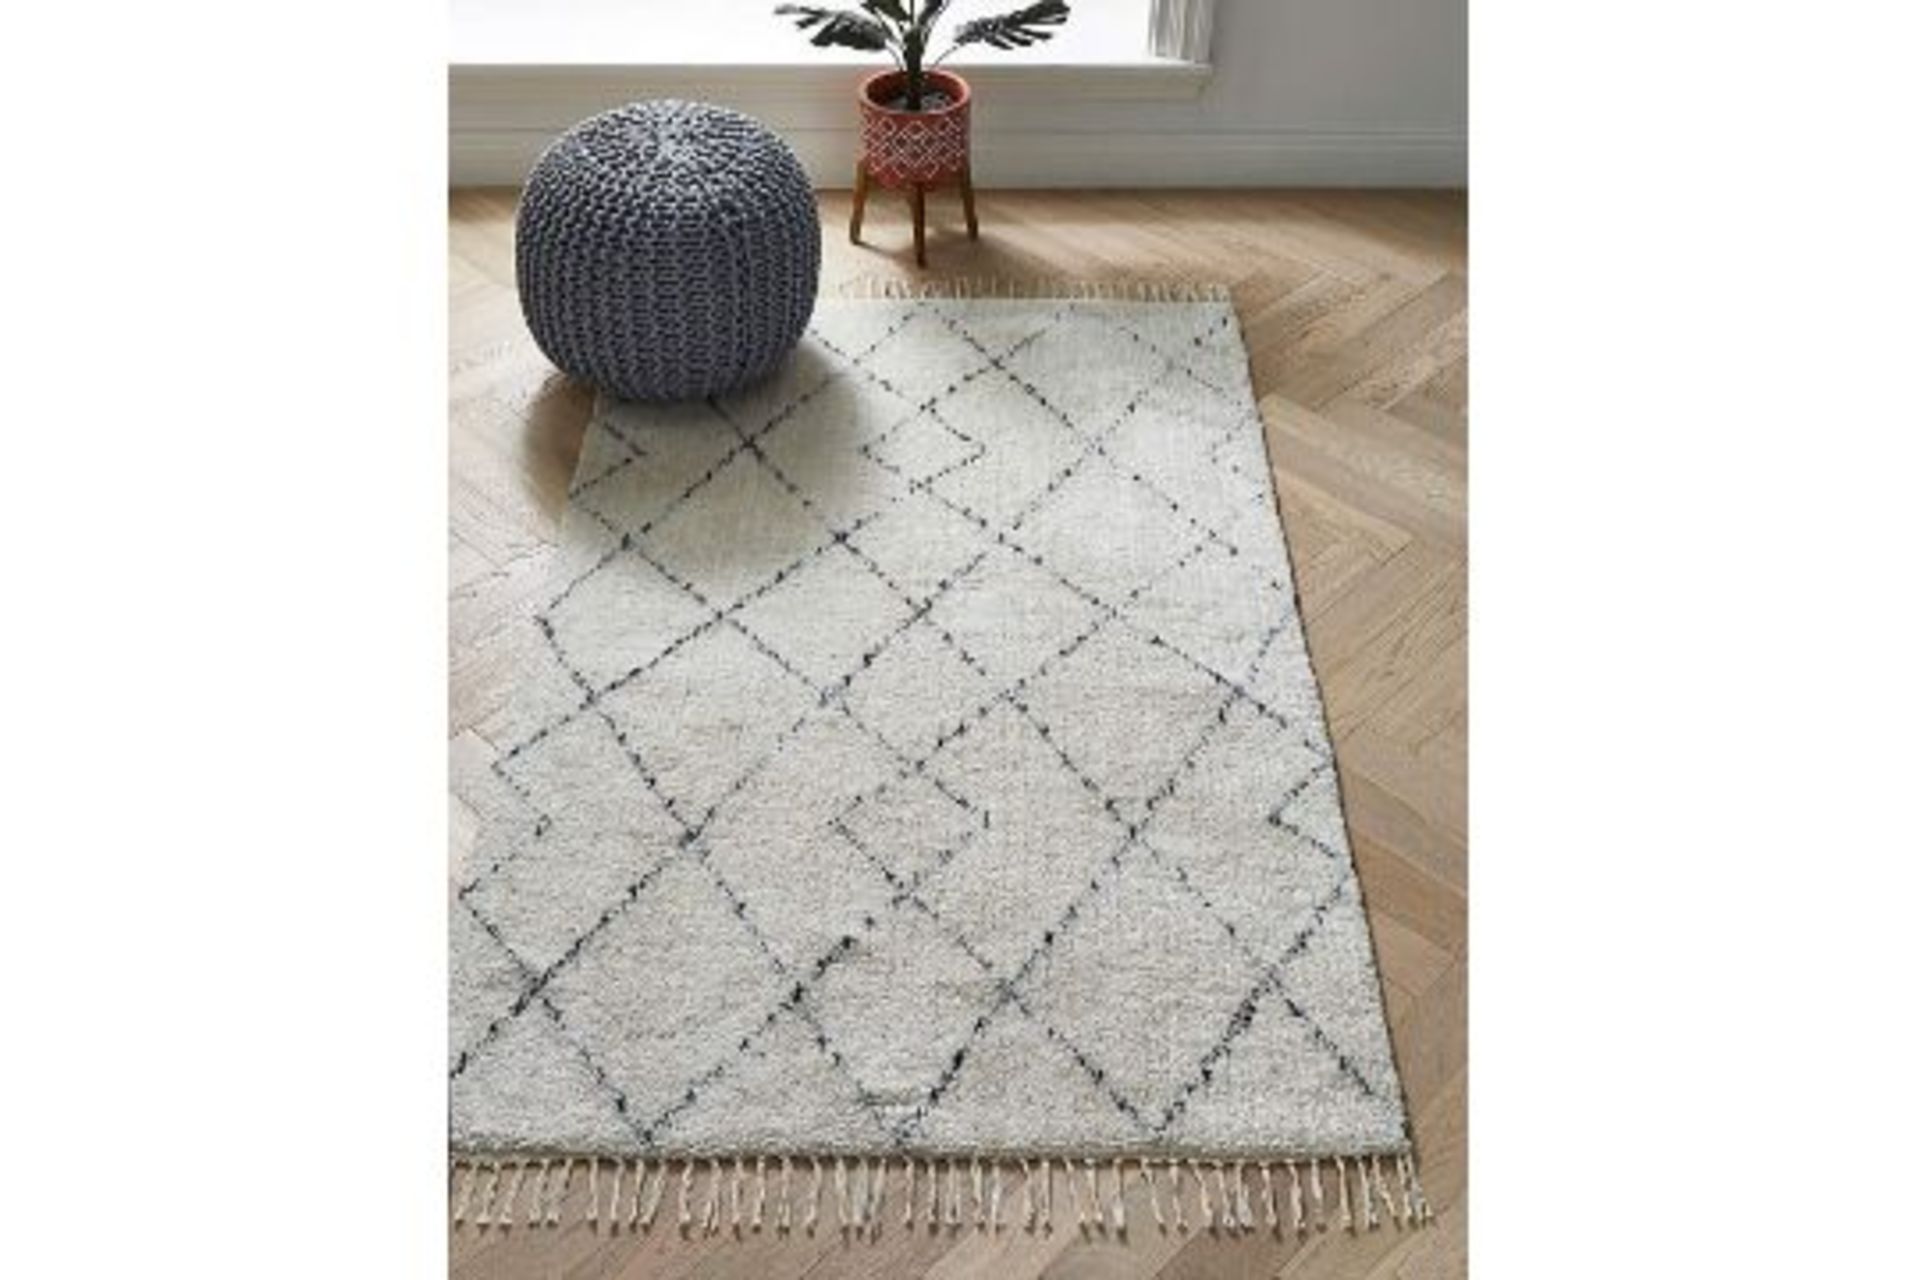 2x BRAND NEW Mono Diamond Rug. RRP £85 EACH. With a latex backing to prevent sliding, this Mono